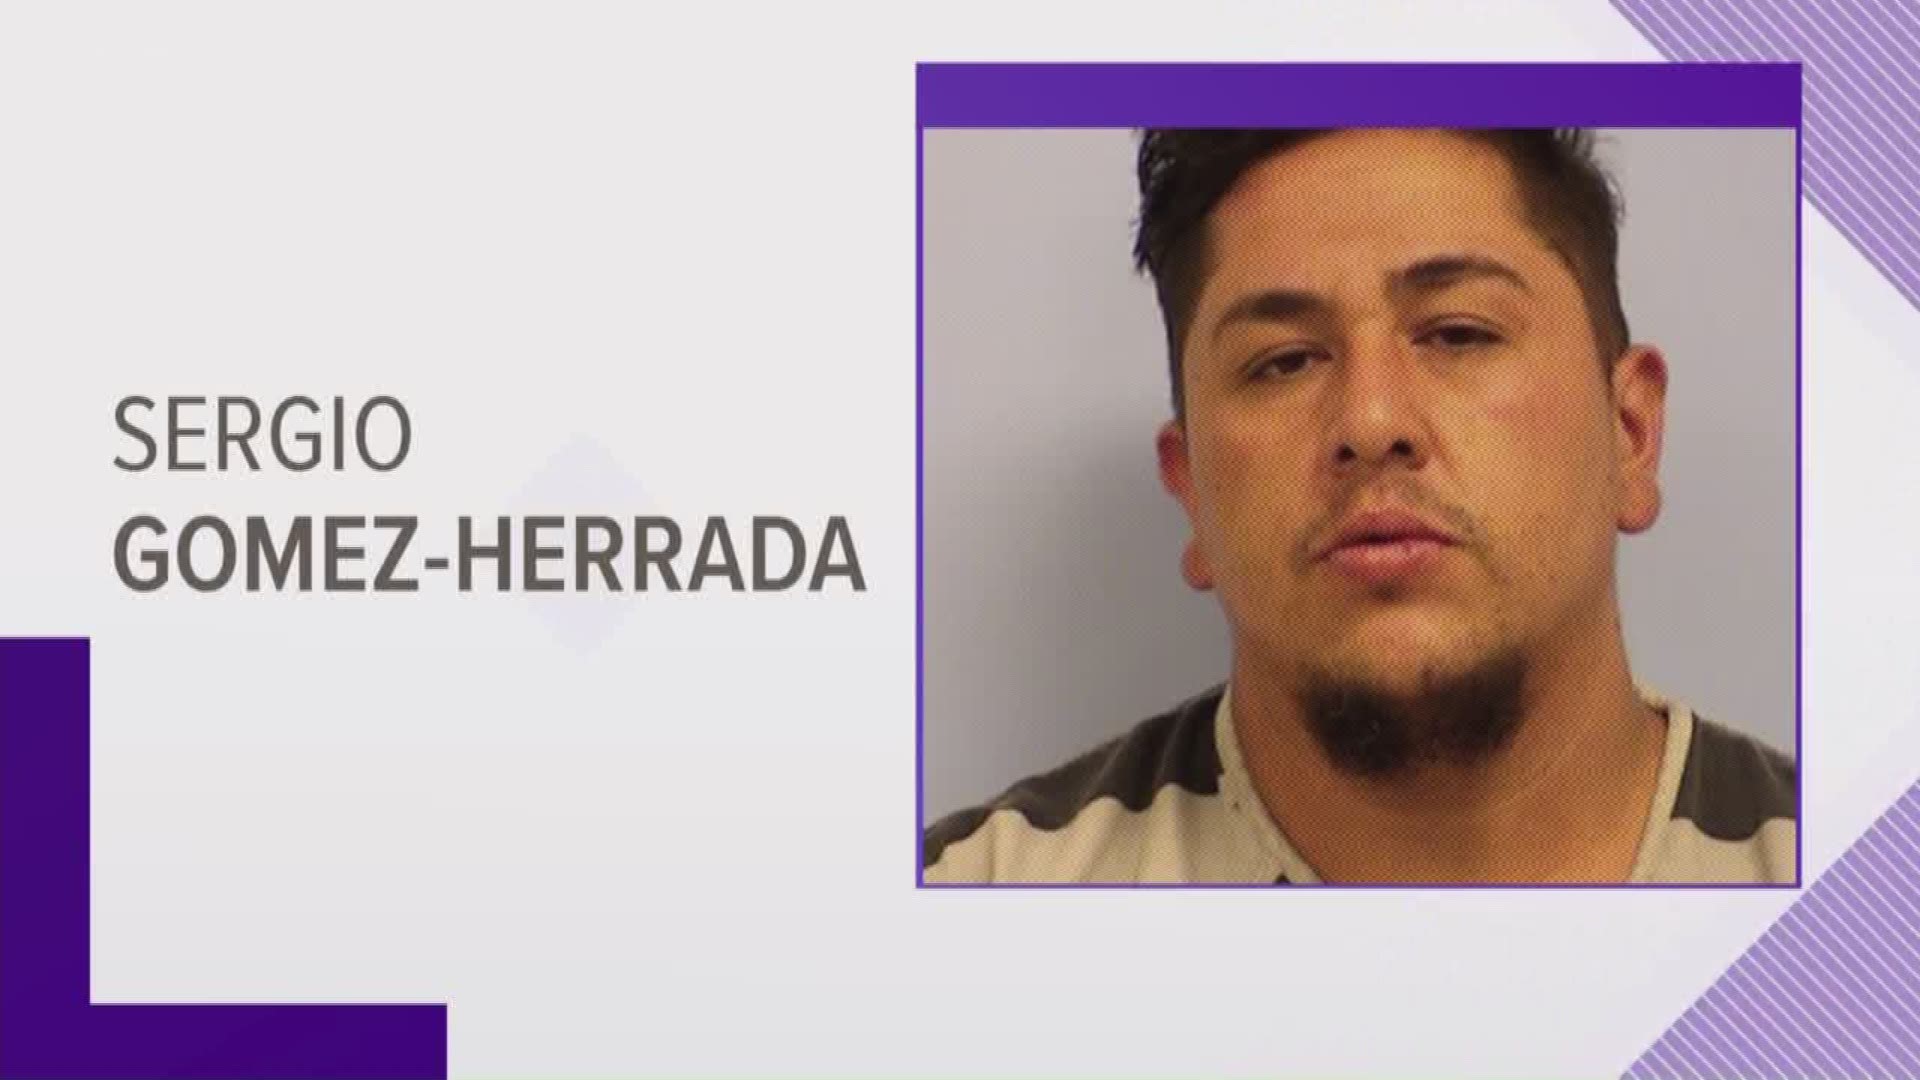 A man accused of killing his girlfriend in South Austin is now in police custody.